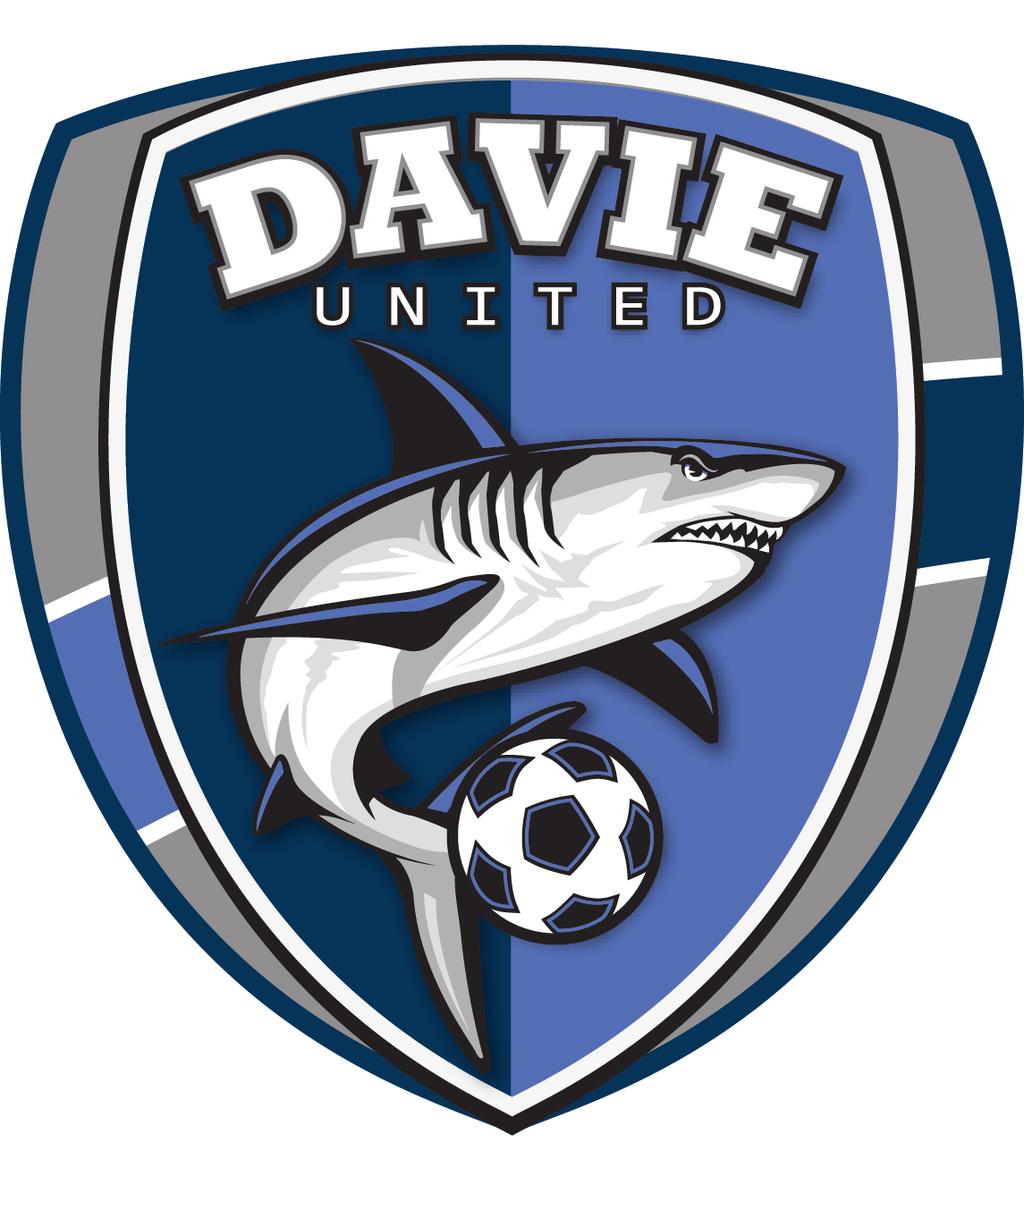 Dear Sponsor, Thank you for your interest in Davie United Soccer Club (DUSC) and for supporting youth soccer. Davie United Soccer Club is a 501(C)(3) non-profit organization.